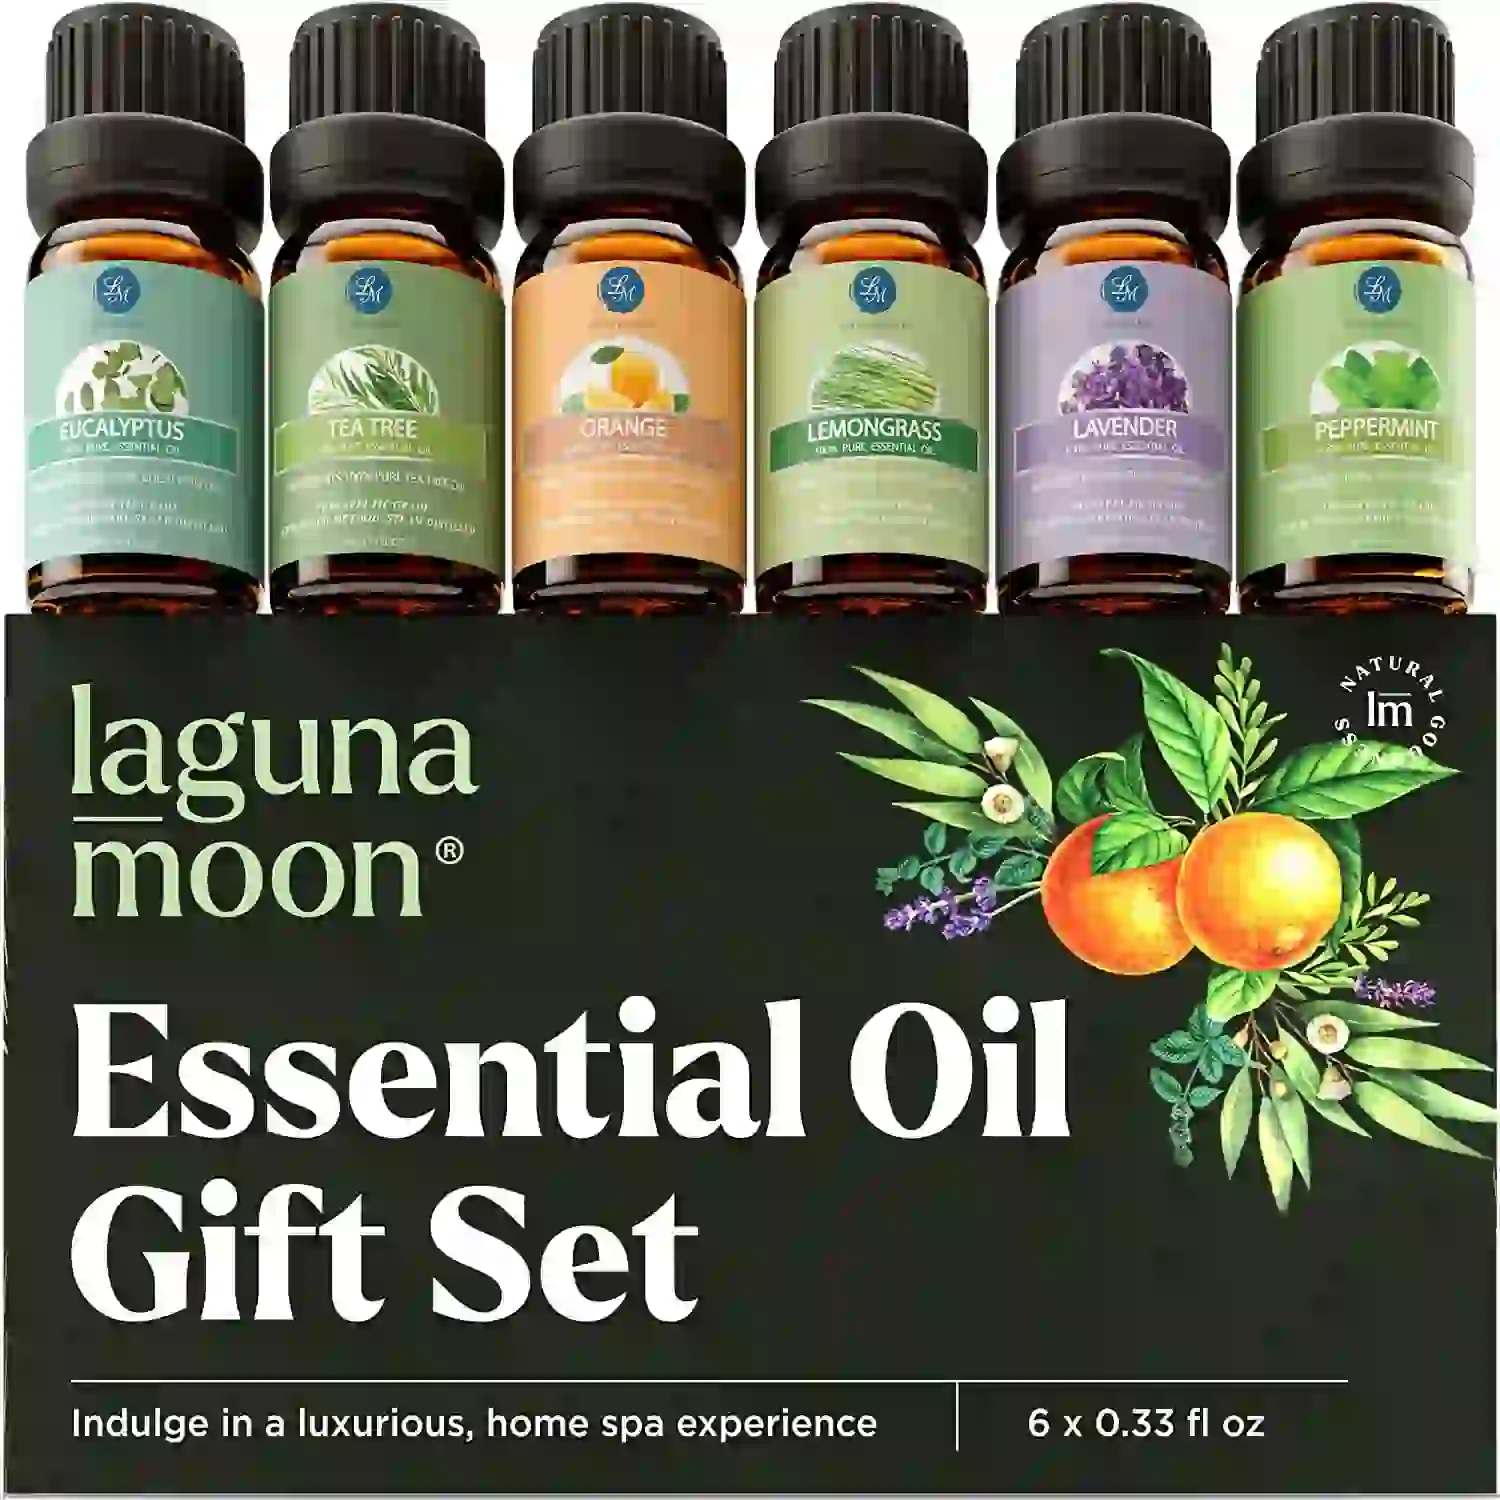 Essential oil set pictures that are good for using in humidifier